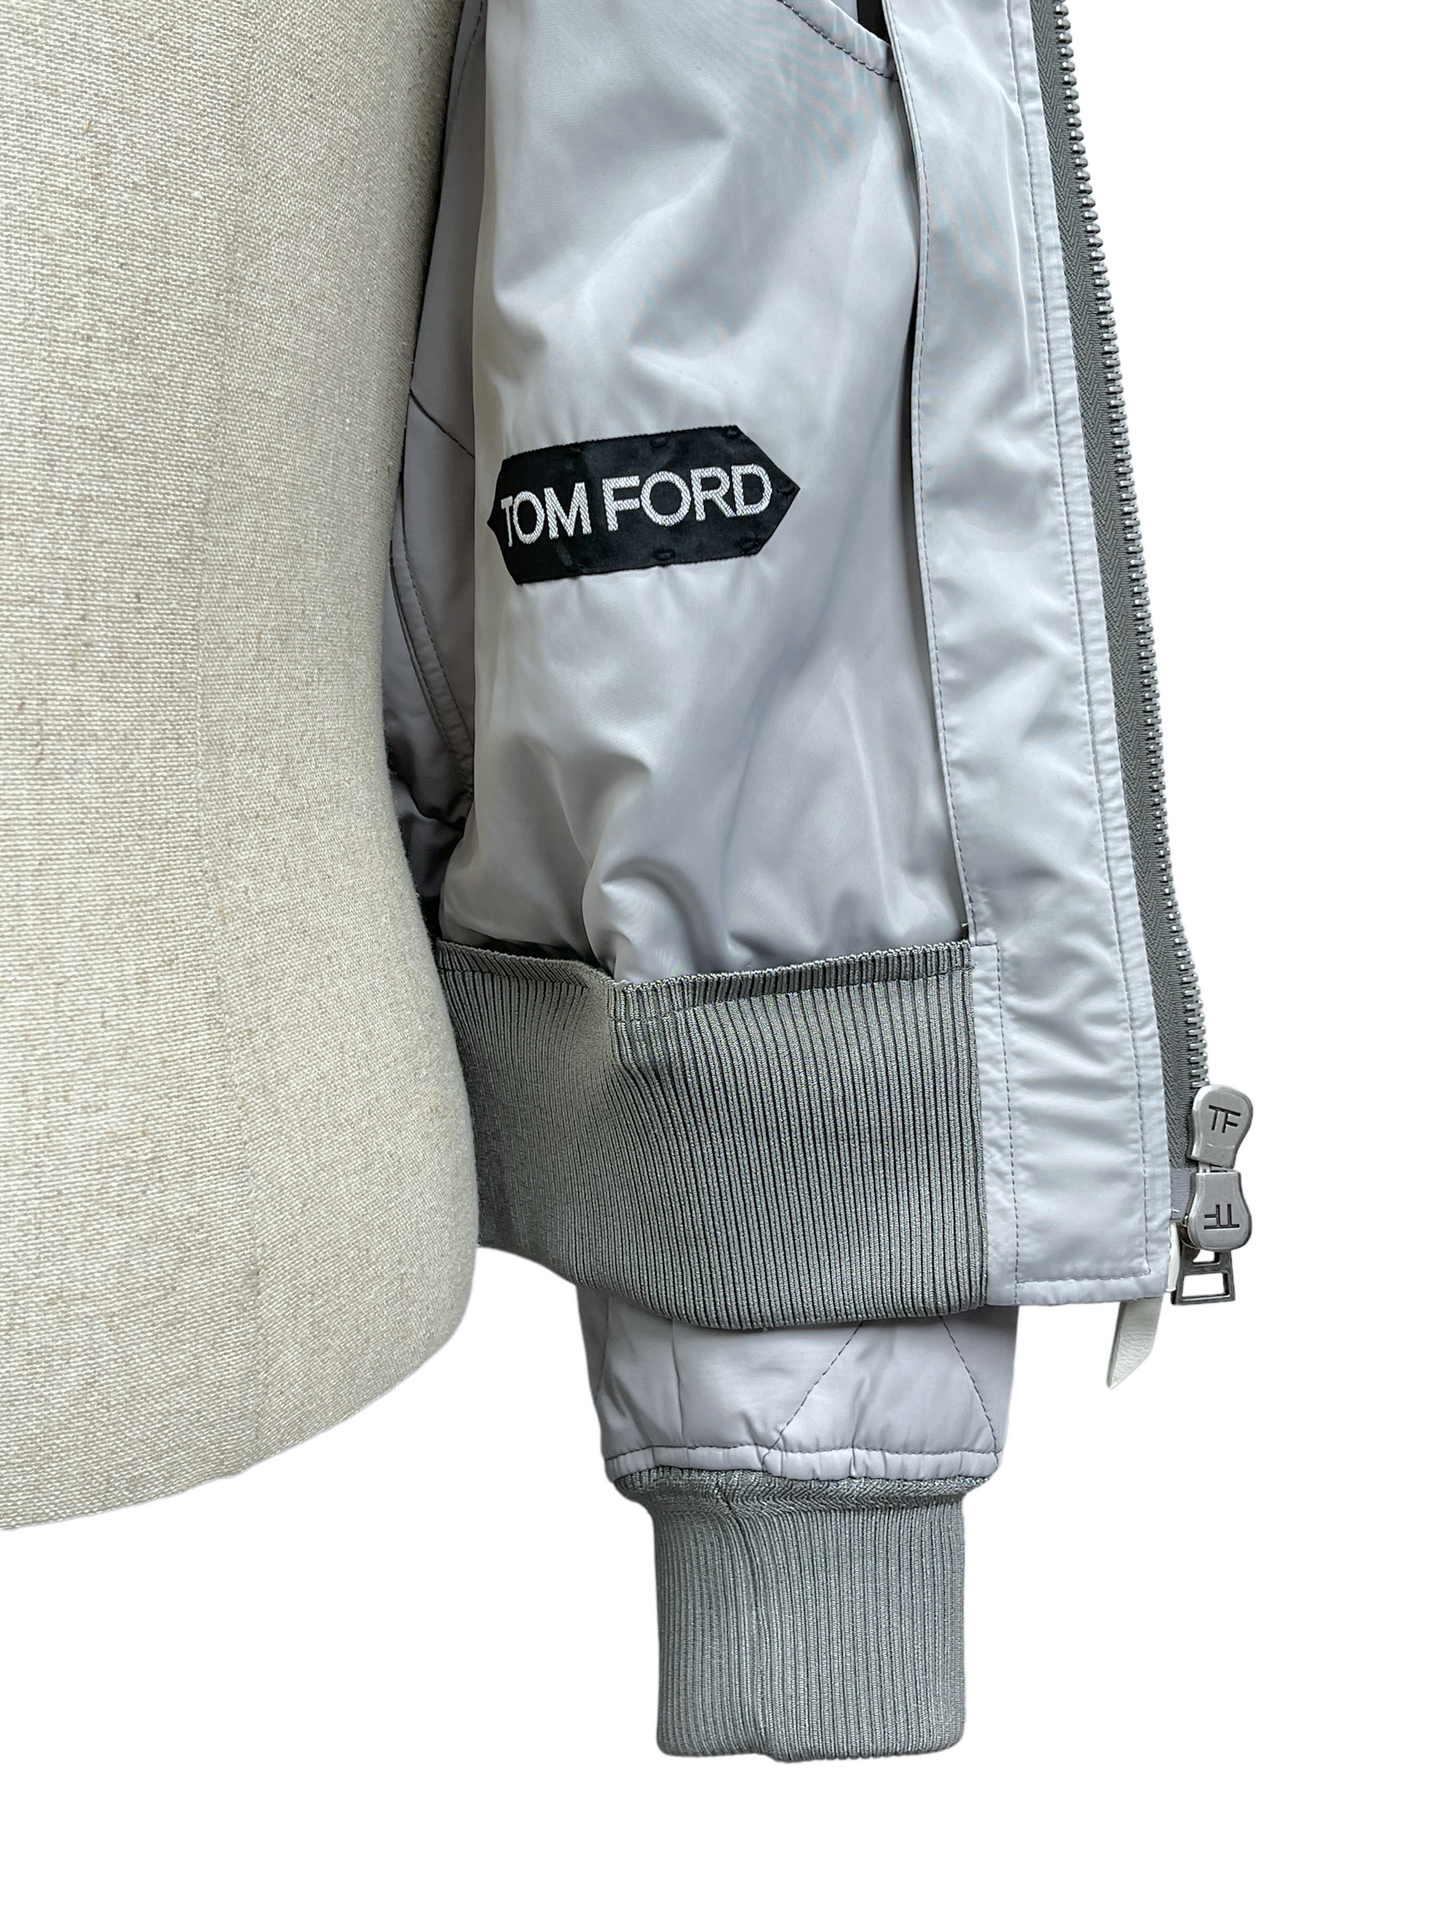 Tom Ford Light Grey Quilted Bomber Jacket 36— Genuine Design Luxury Consignment Calgary, Alberta, Canada New and Pre-Owned Clothing, Shoes, Accessories.